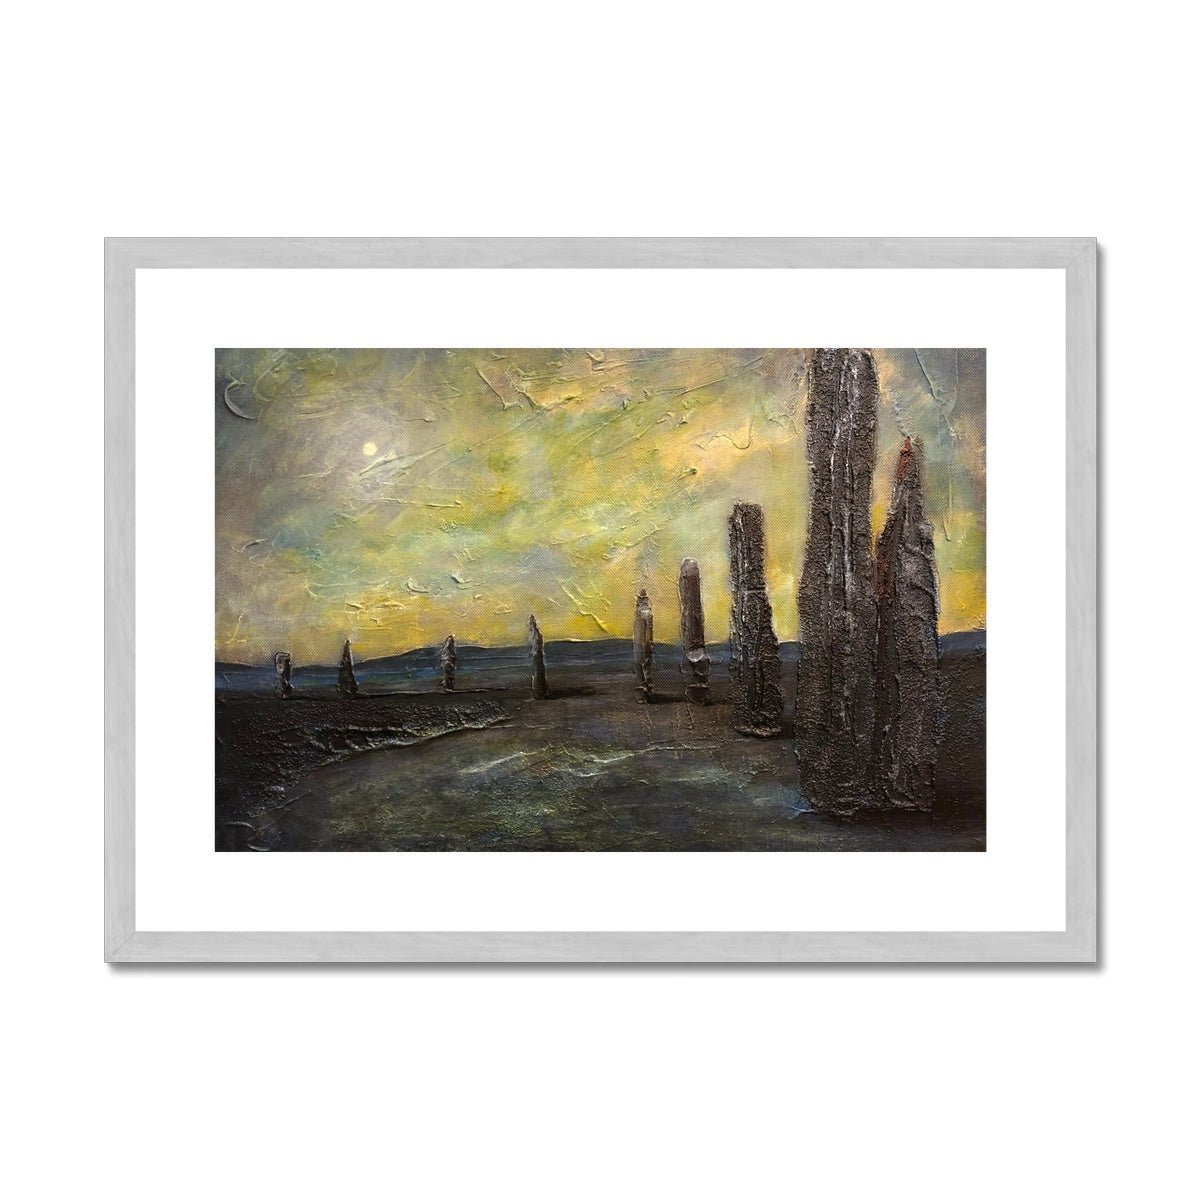 An Ethereal Ring Of Brodgar Orkney Painting | Antique Framed & Mounted Prints From Scotland-Antique Framed & Mounted Prints-Orkney Art Gallery-A2 Landscape-Silver Frame-Paintings, Prints, Homeware, Art Gifts From Scotland By Scottish Artist Kevin Hunter